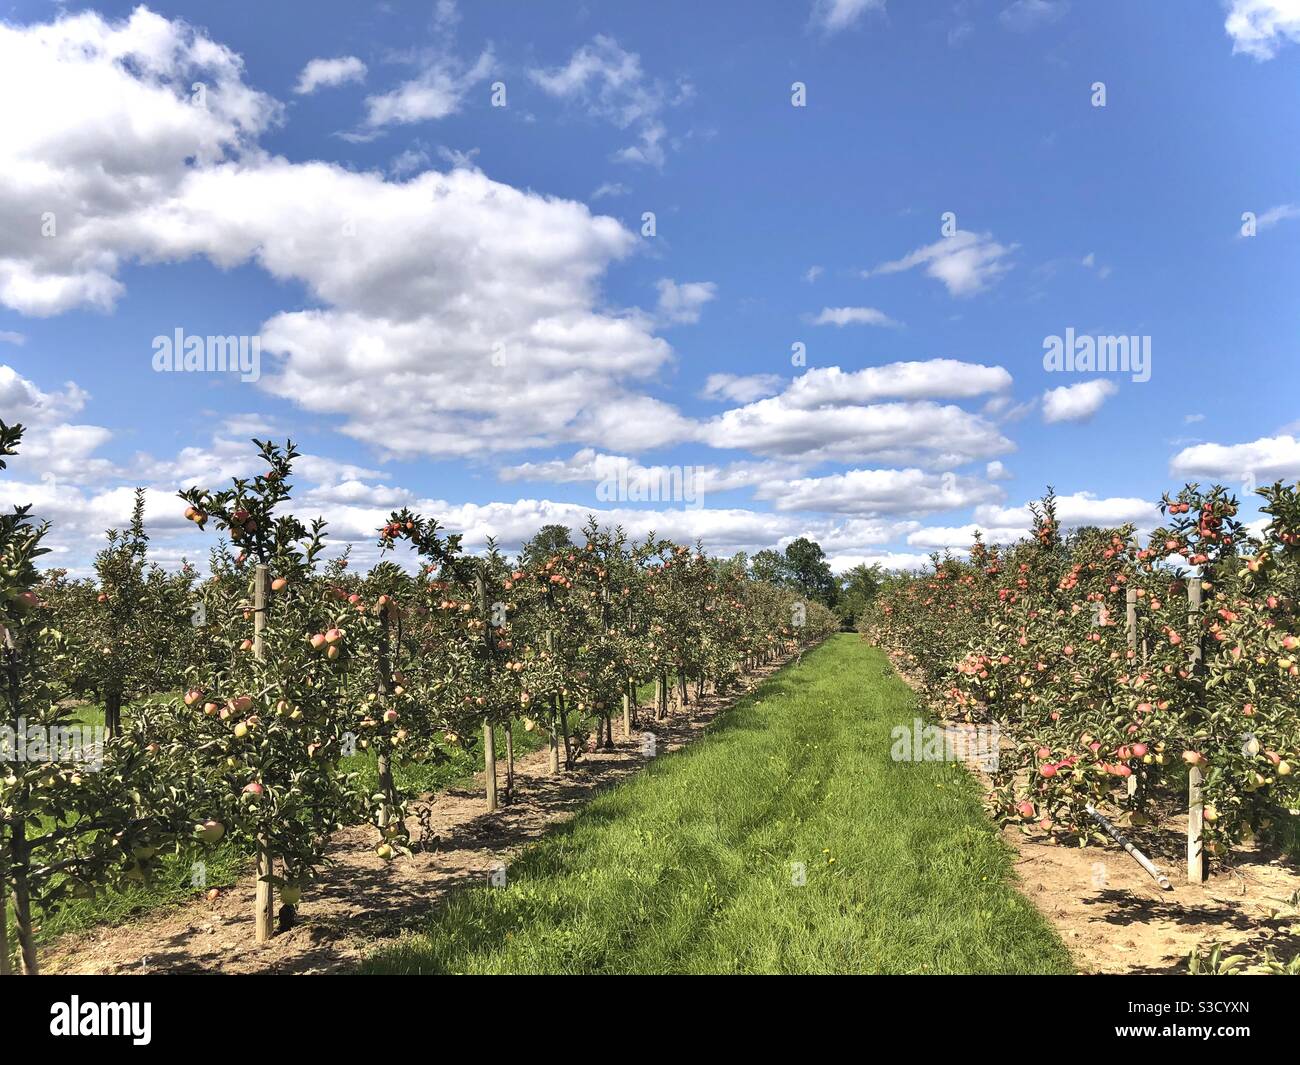 Apple picking is fun for whole family Stock Photo